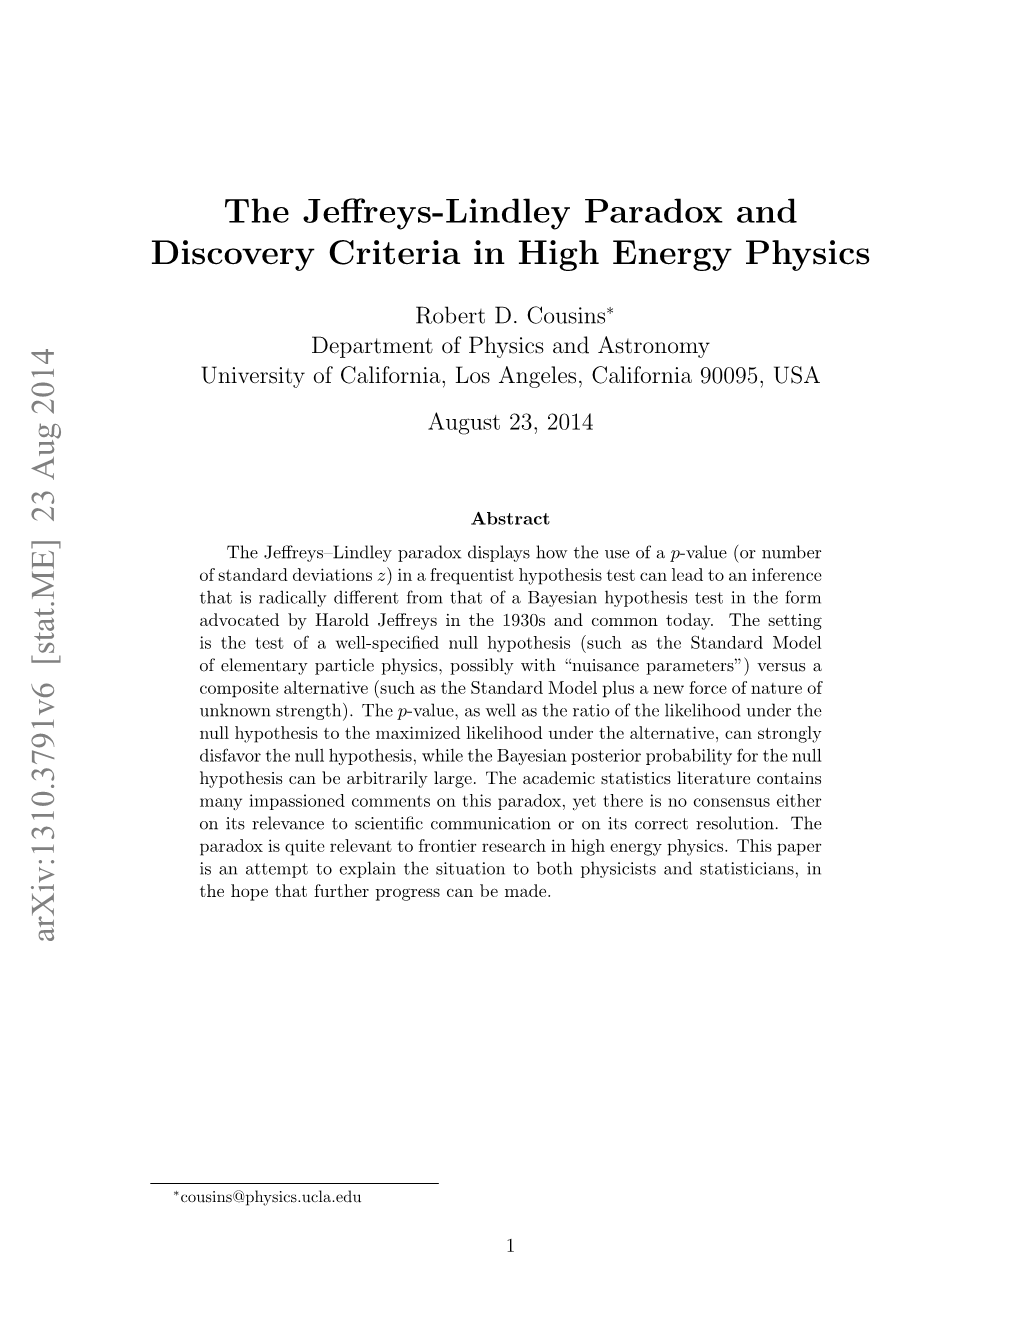 The Jeffreys-Lindley Paradox and Discovery Criteria in High Energy